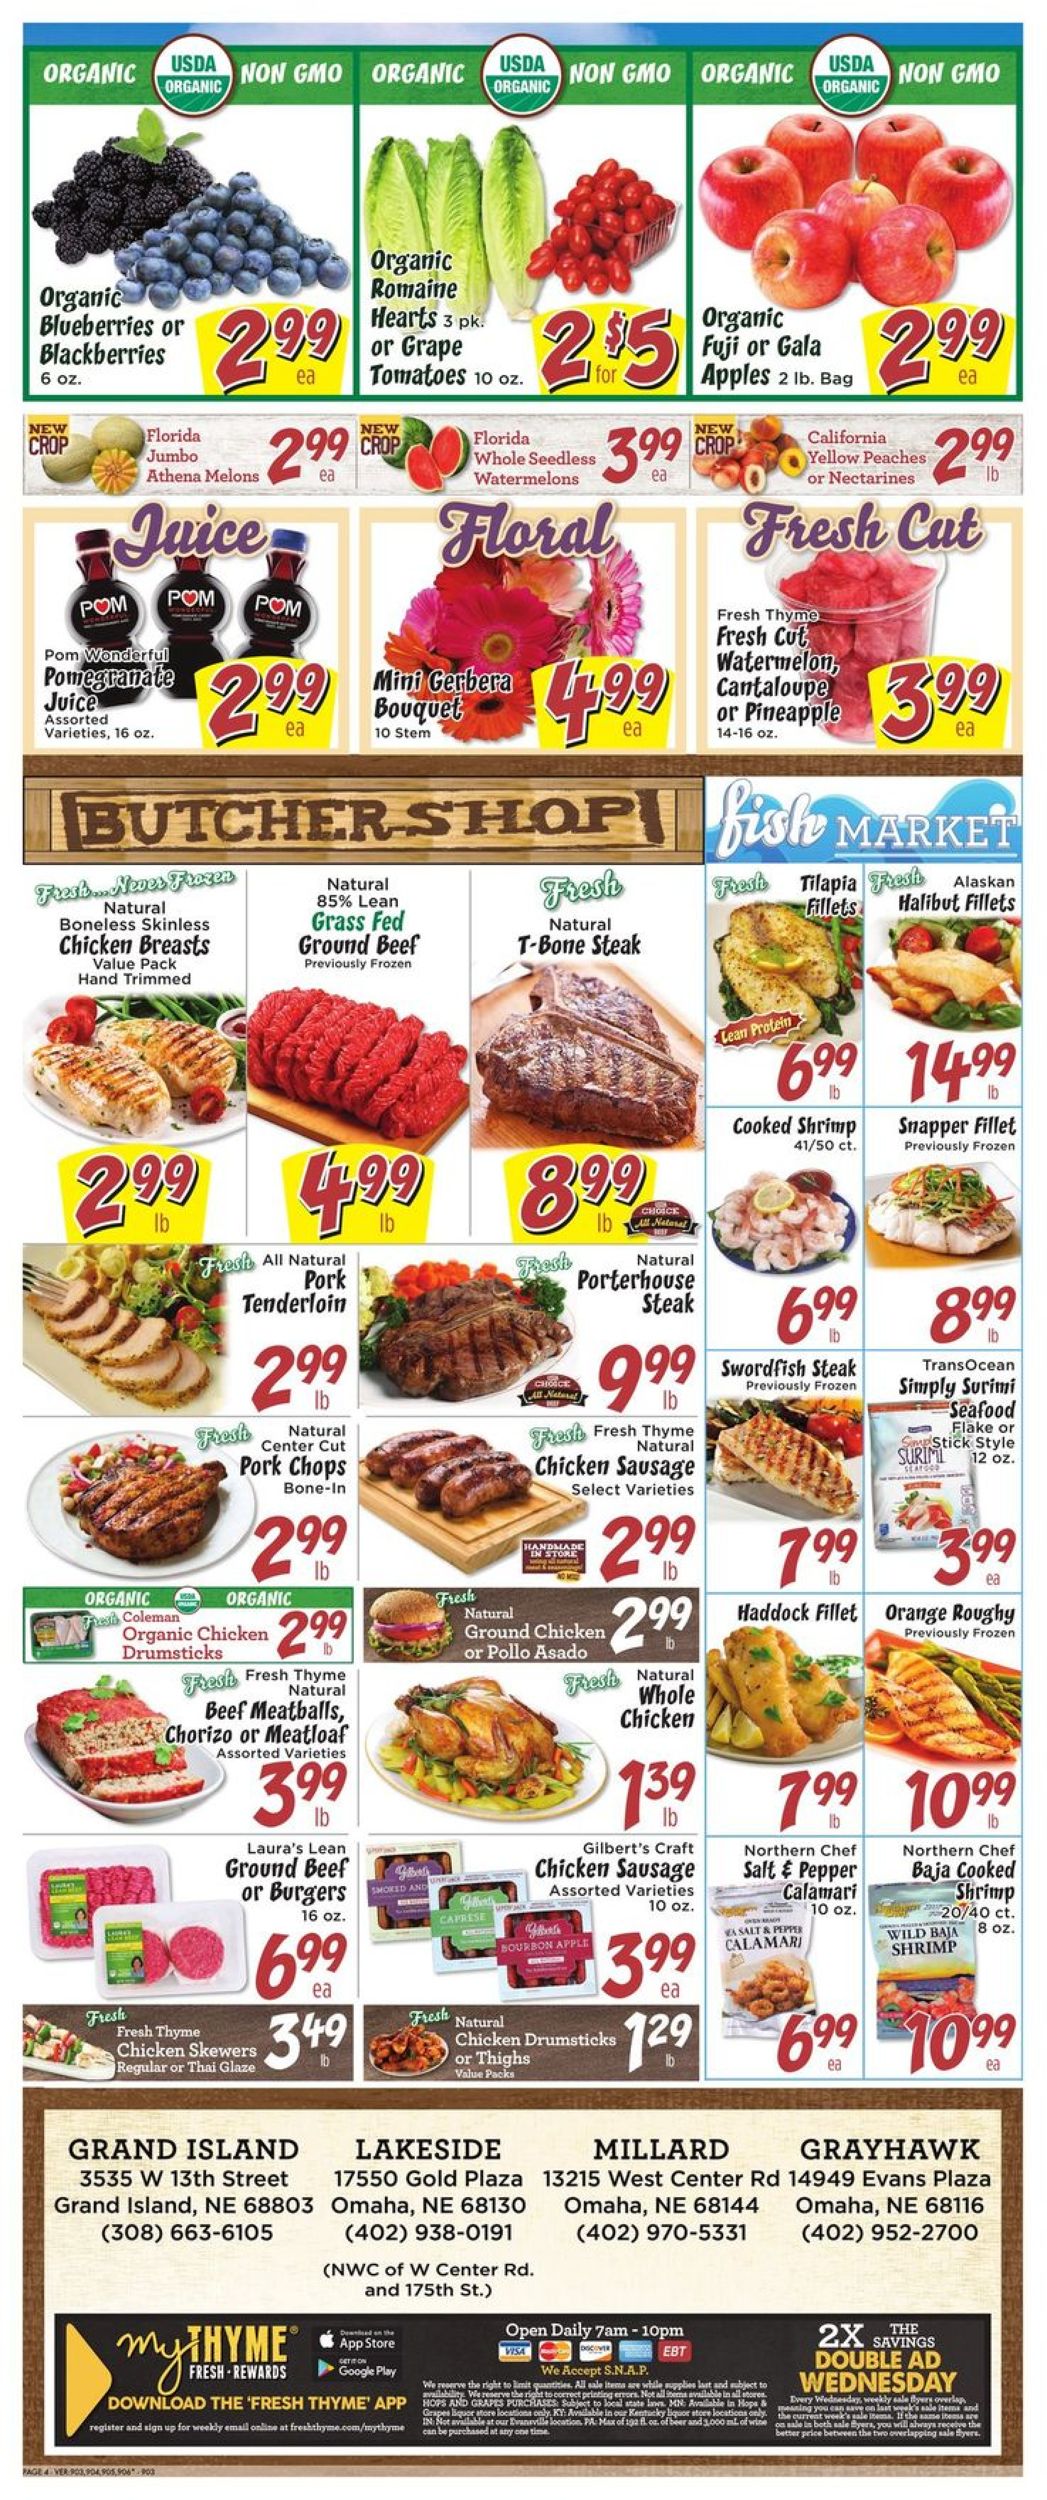 Fresh Thyme Current weekly ad 05/15 - 05/22/2019 [8] - frequent-ads.com